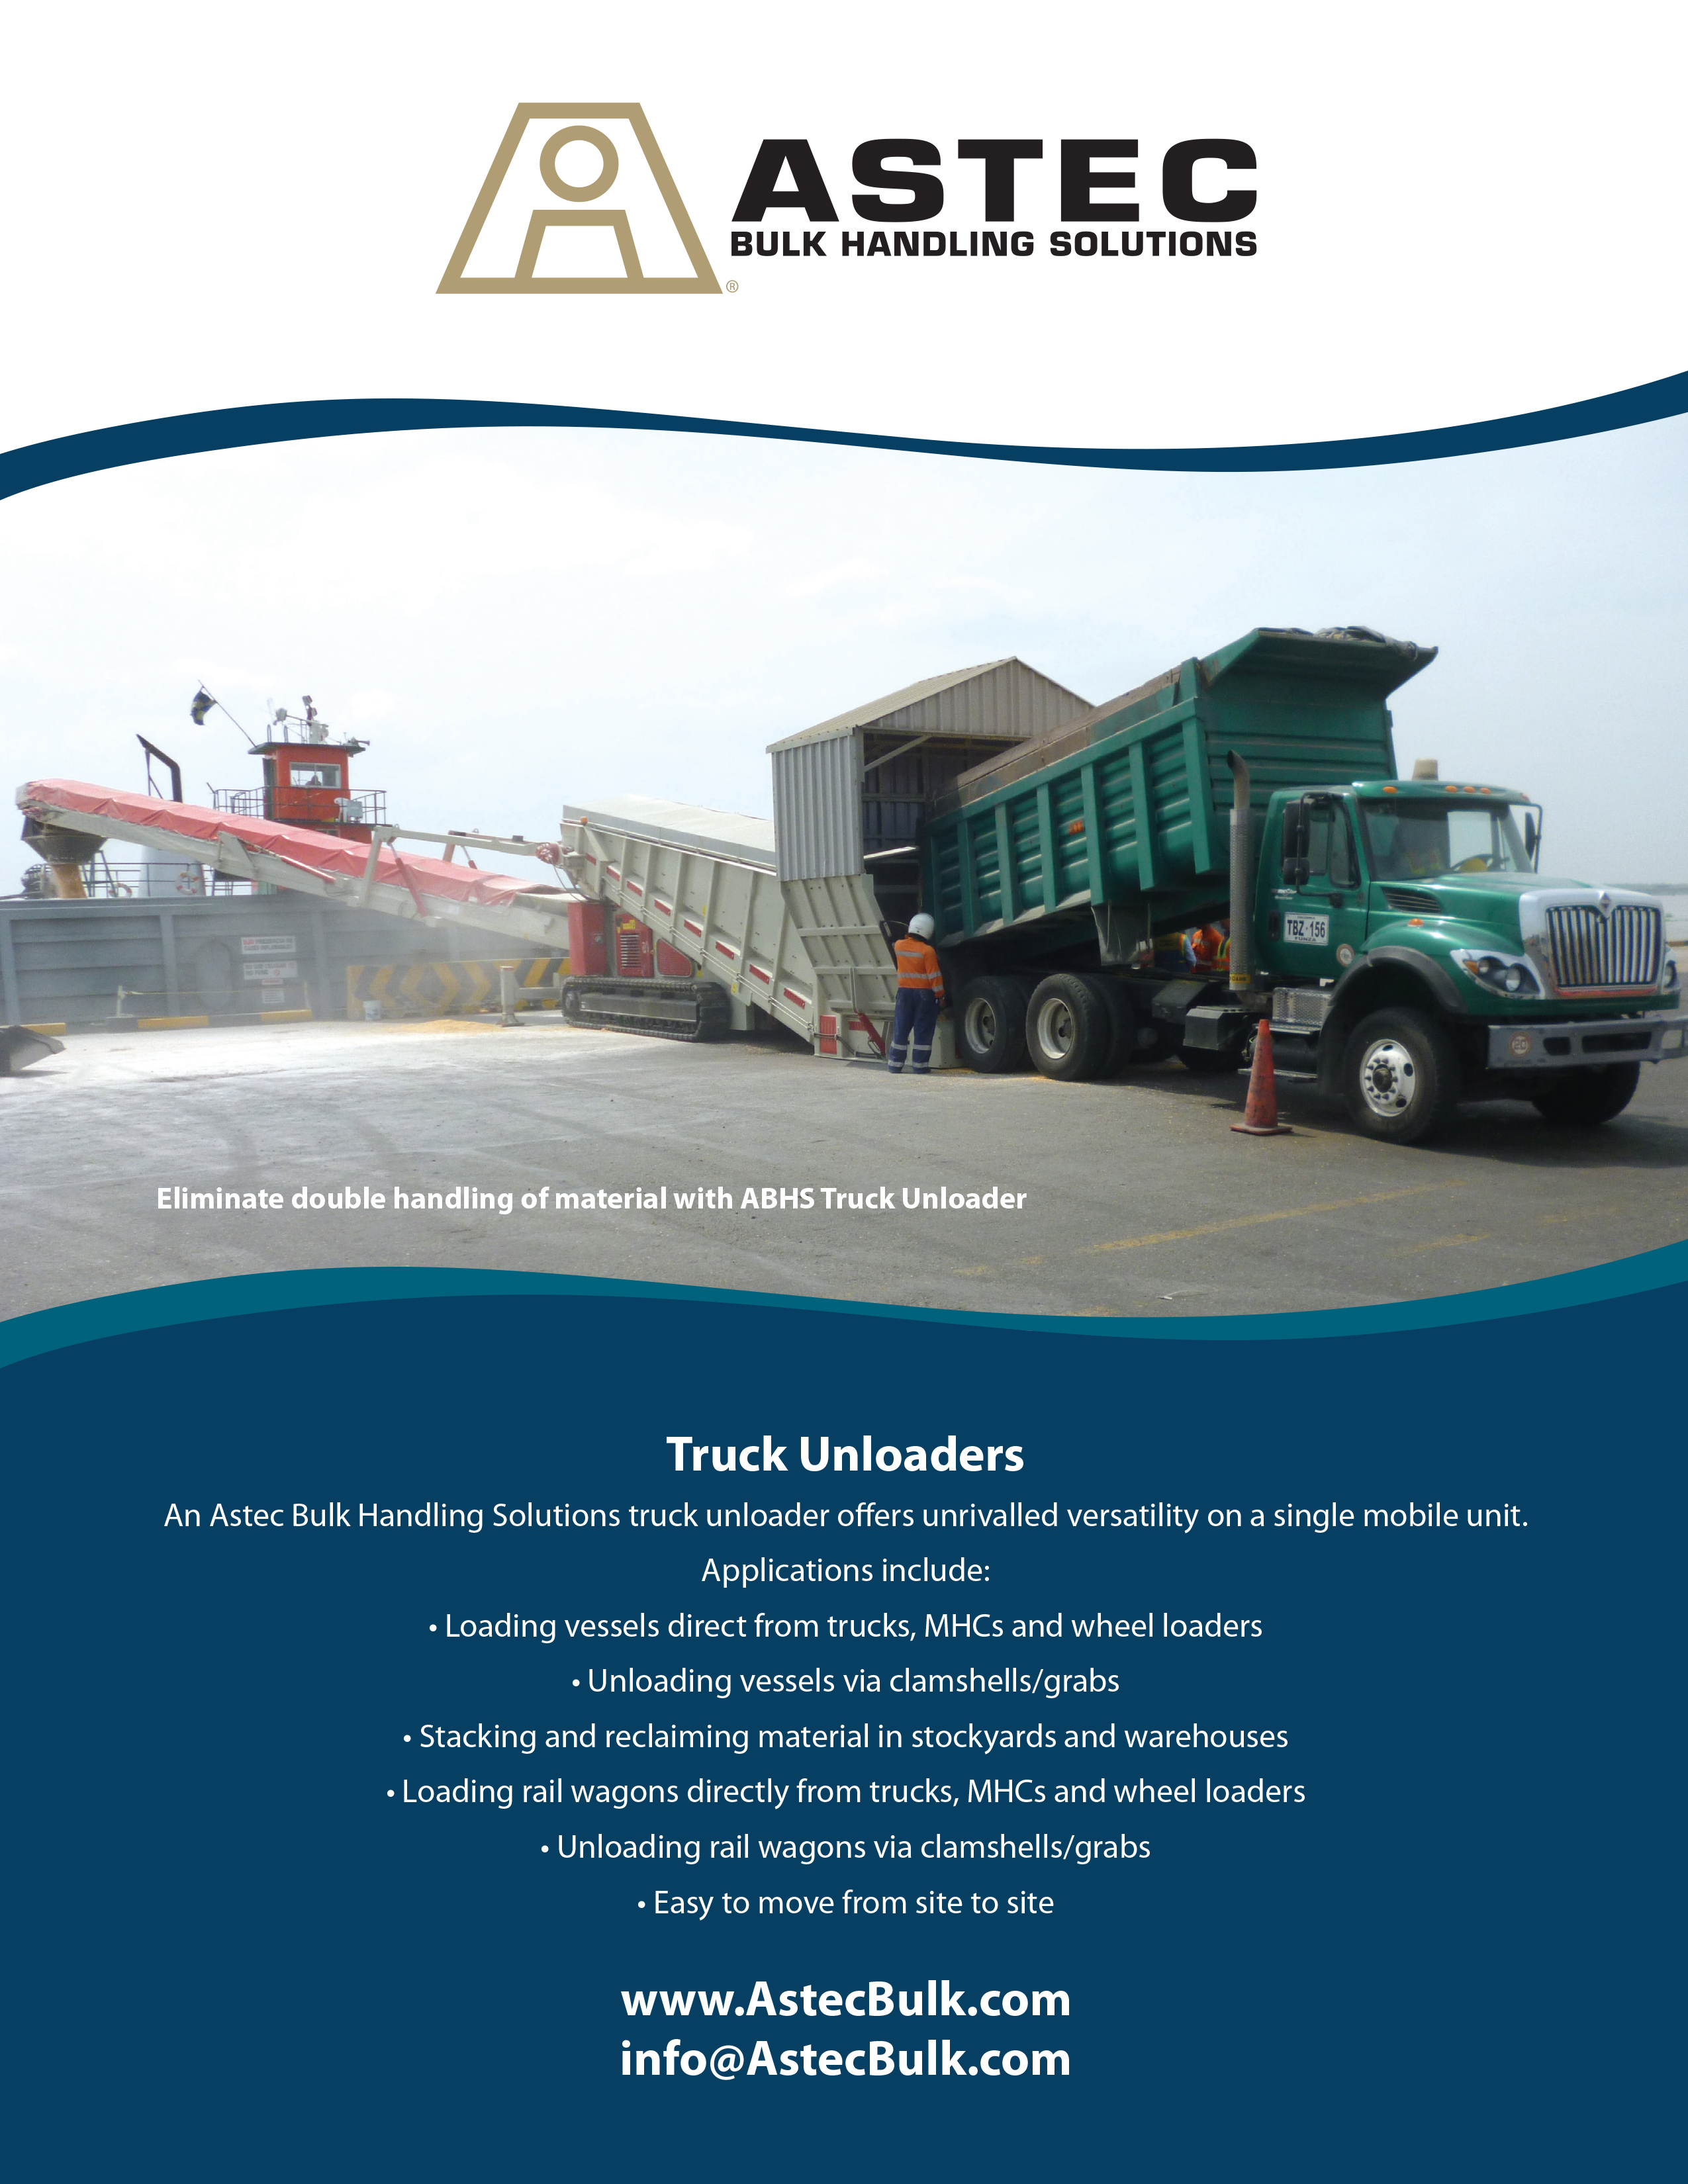 Find out about ABHS Truck Unloaders